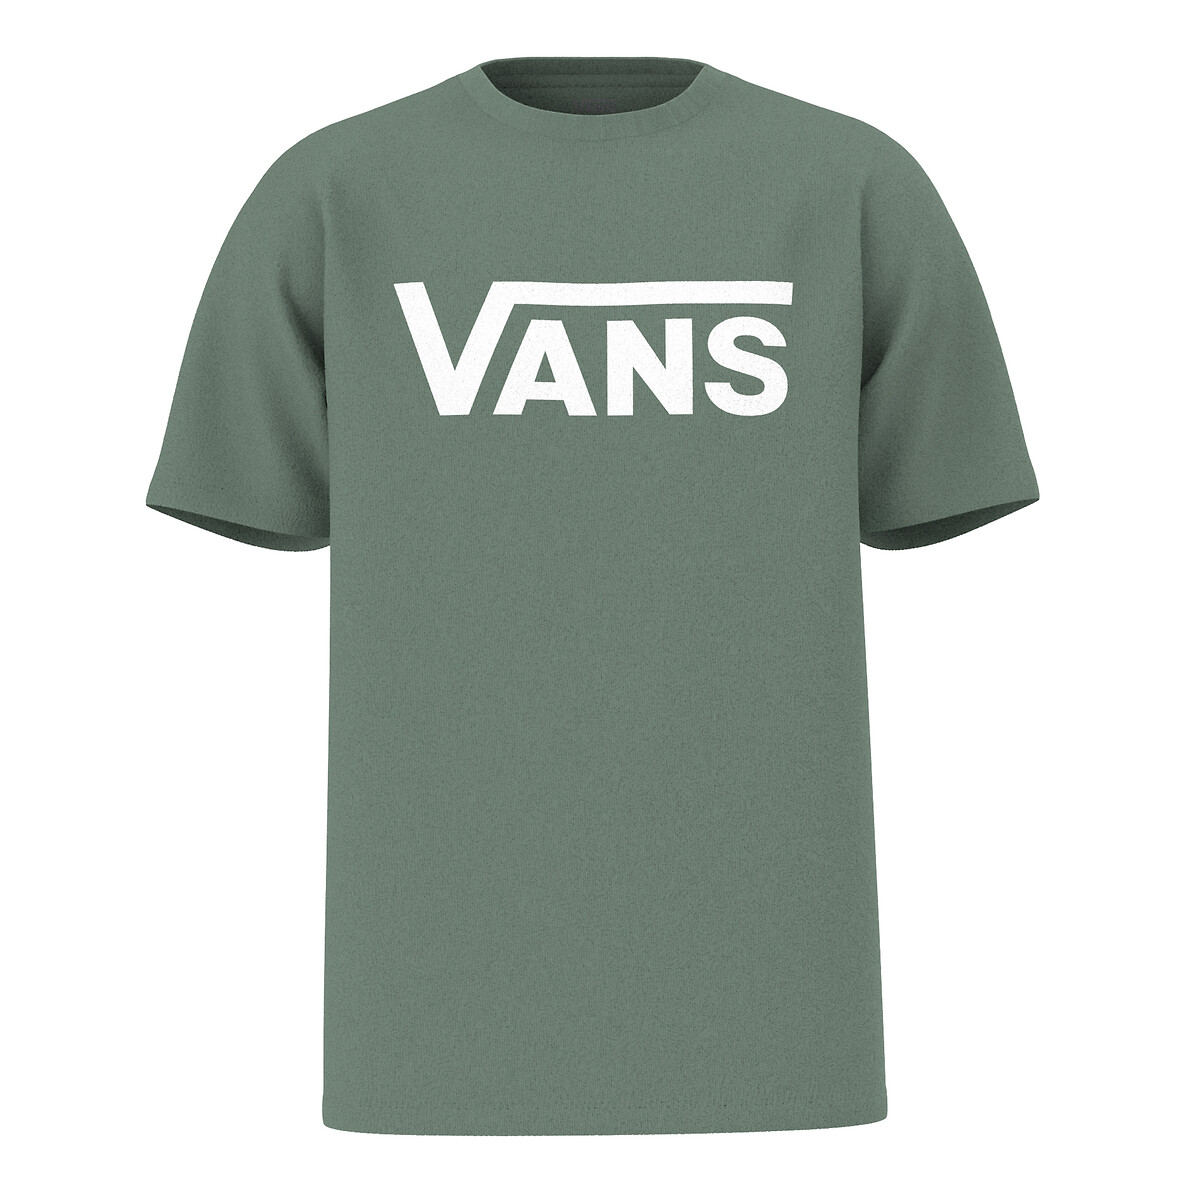 Logo Print T-Shirt in Cotton Mix with Short Sleeves and Crew Neck